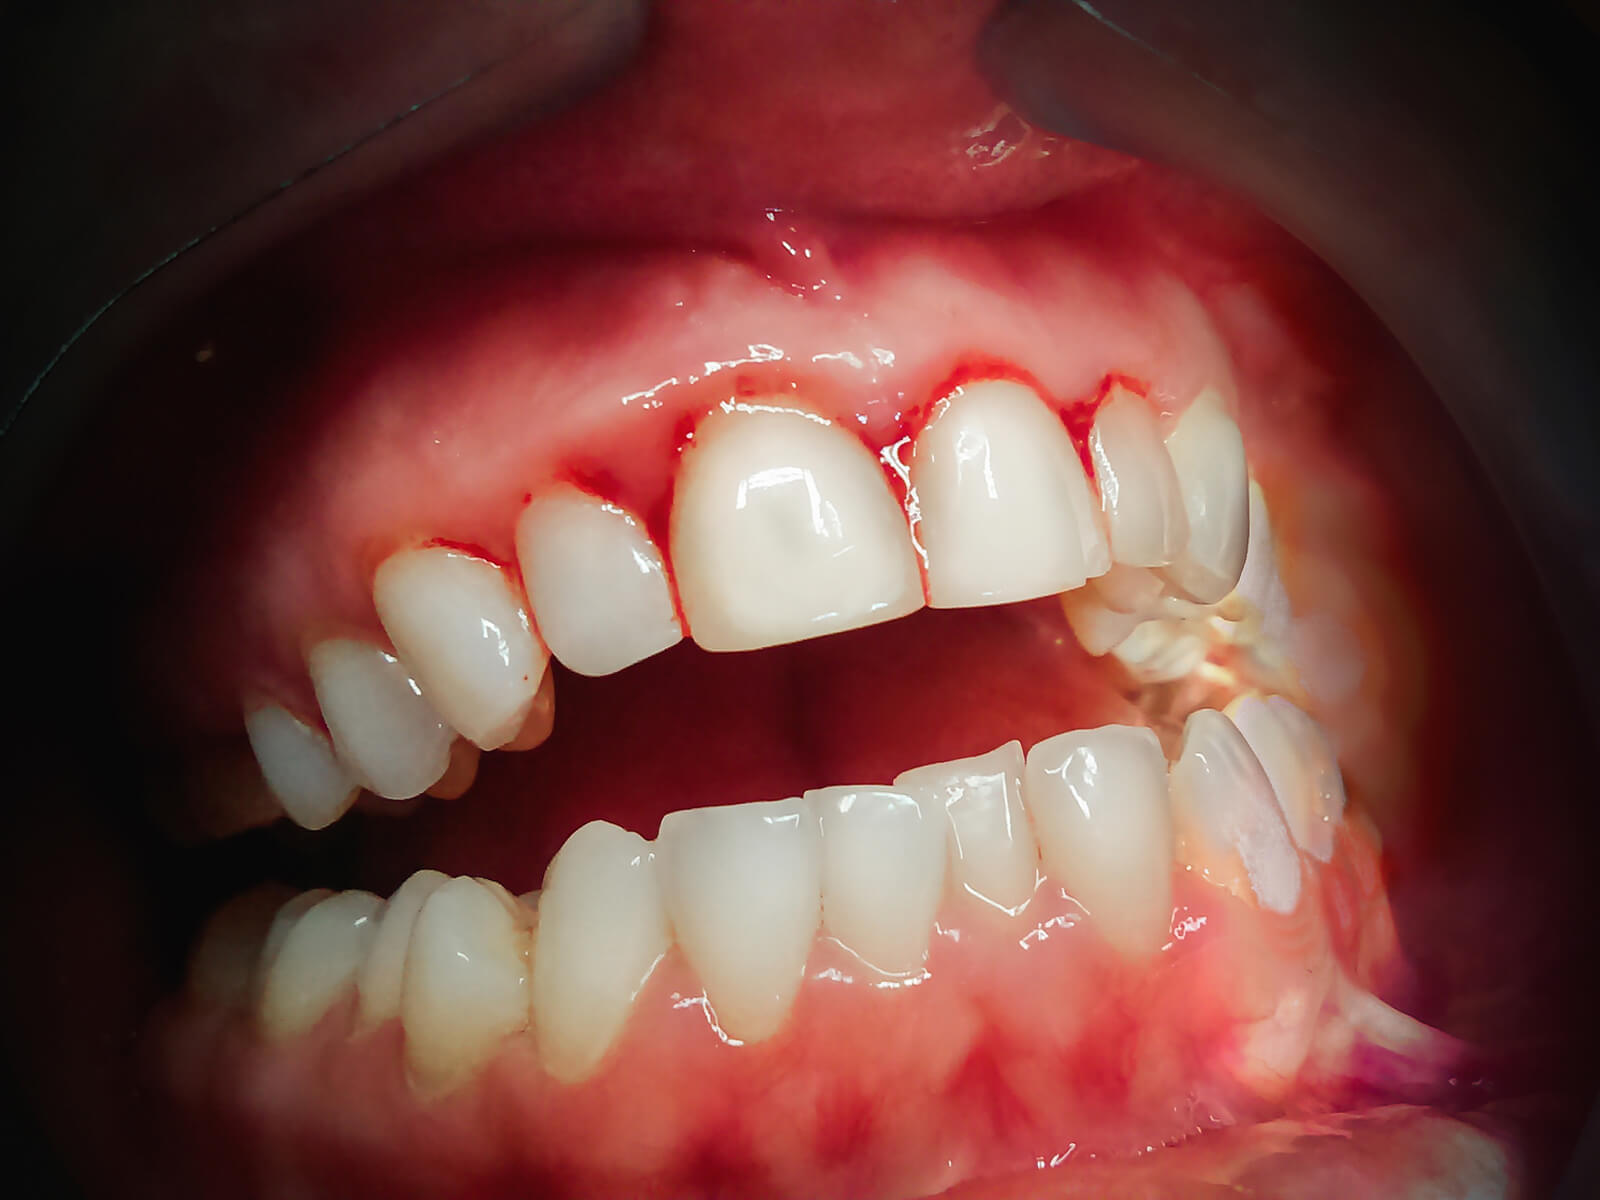 How Can I Heal My Inflamed Gums?